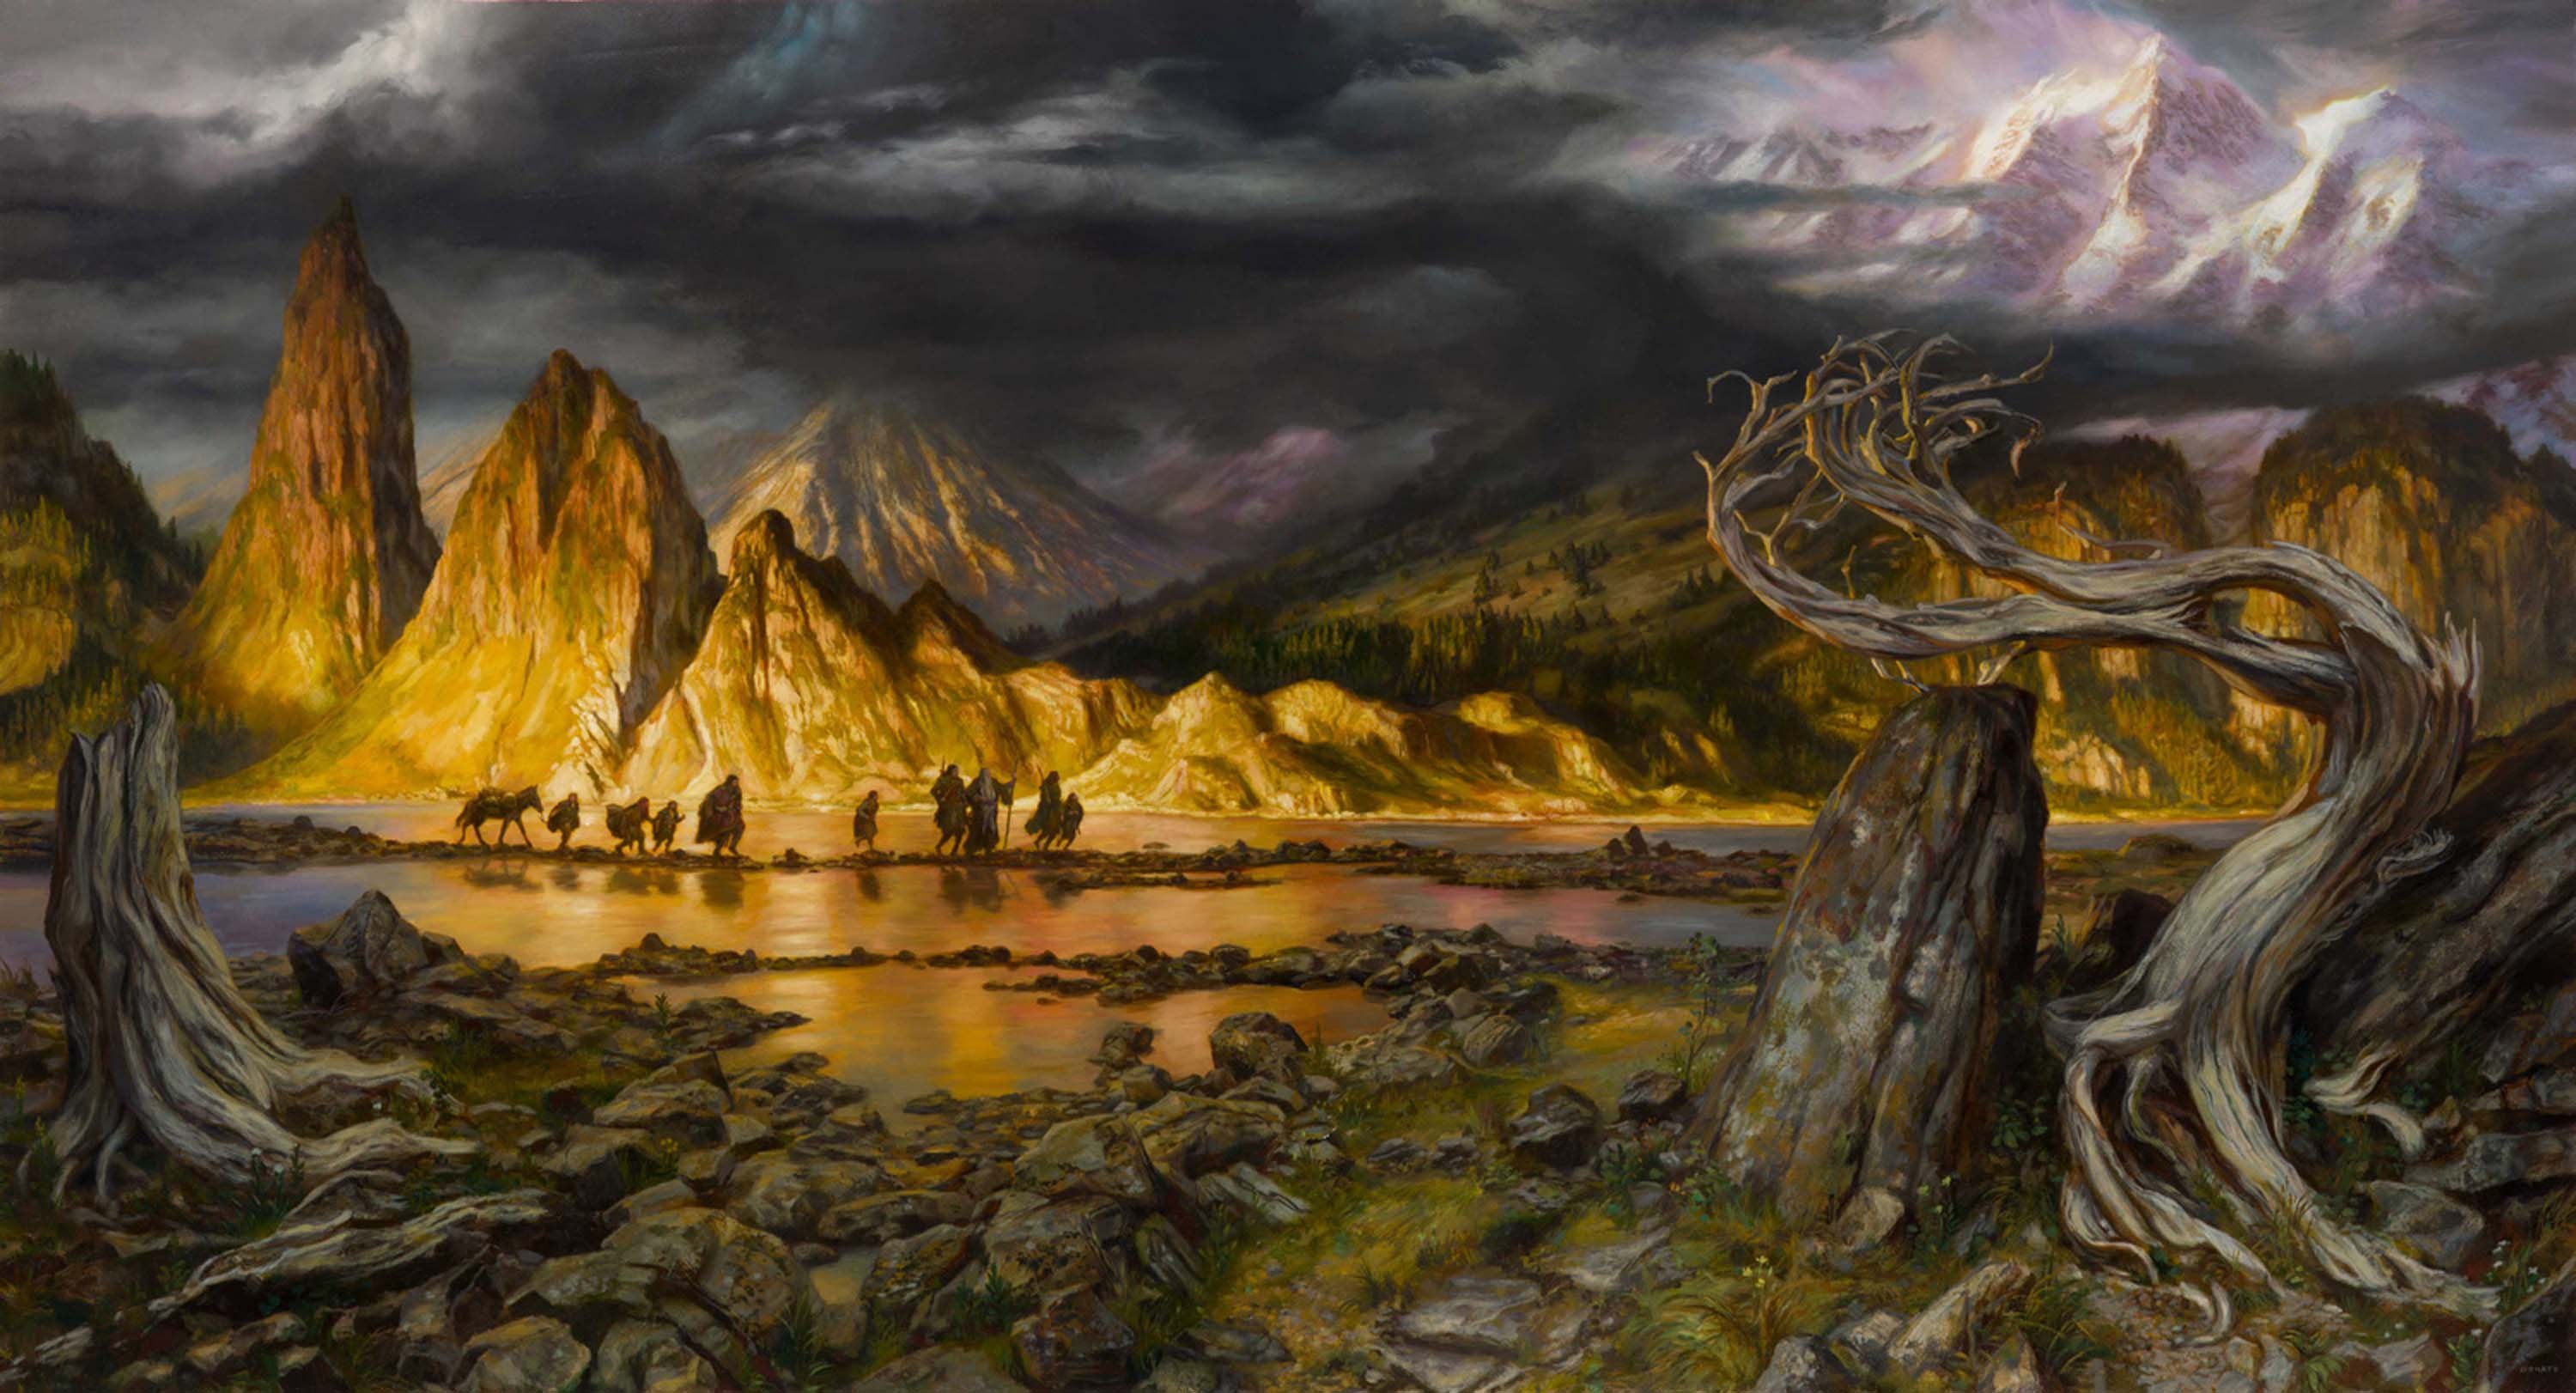 The Fellowship in Hollin
35" x 66"  Oil on Panel 2017
'only the stones remember the elves now.'
collection of the artist